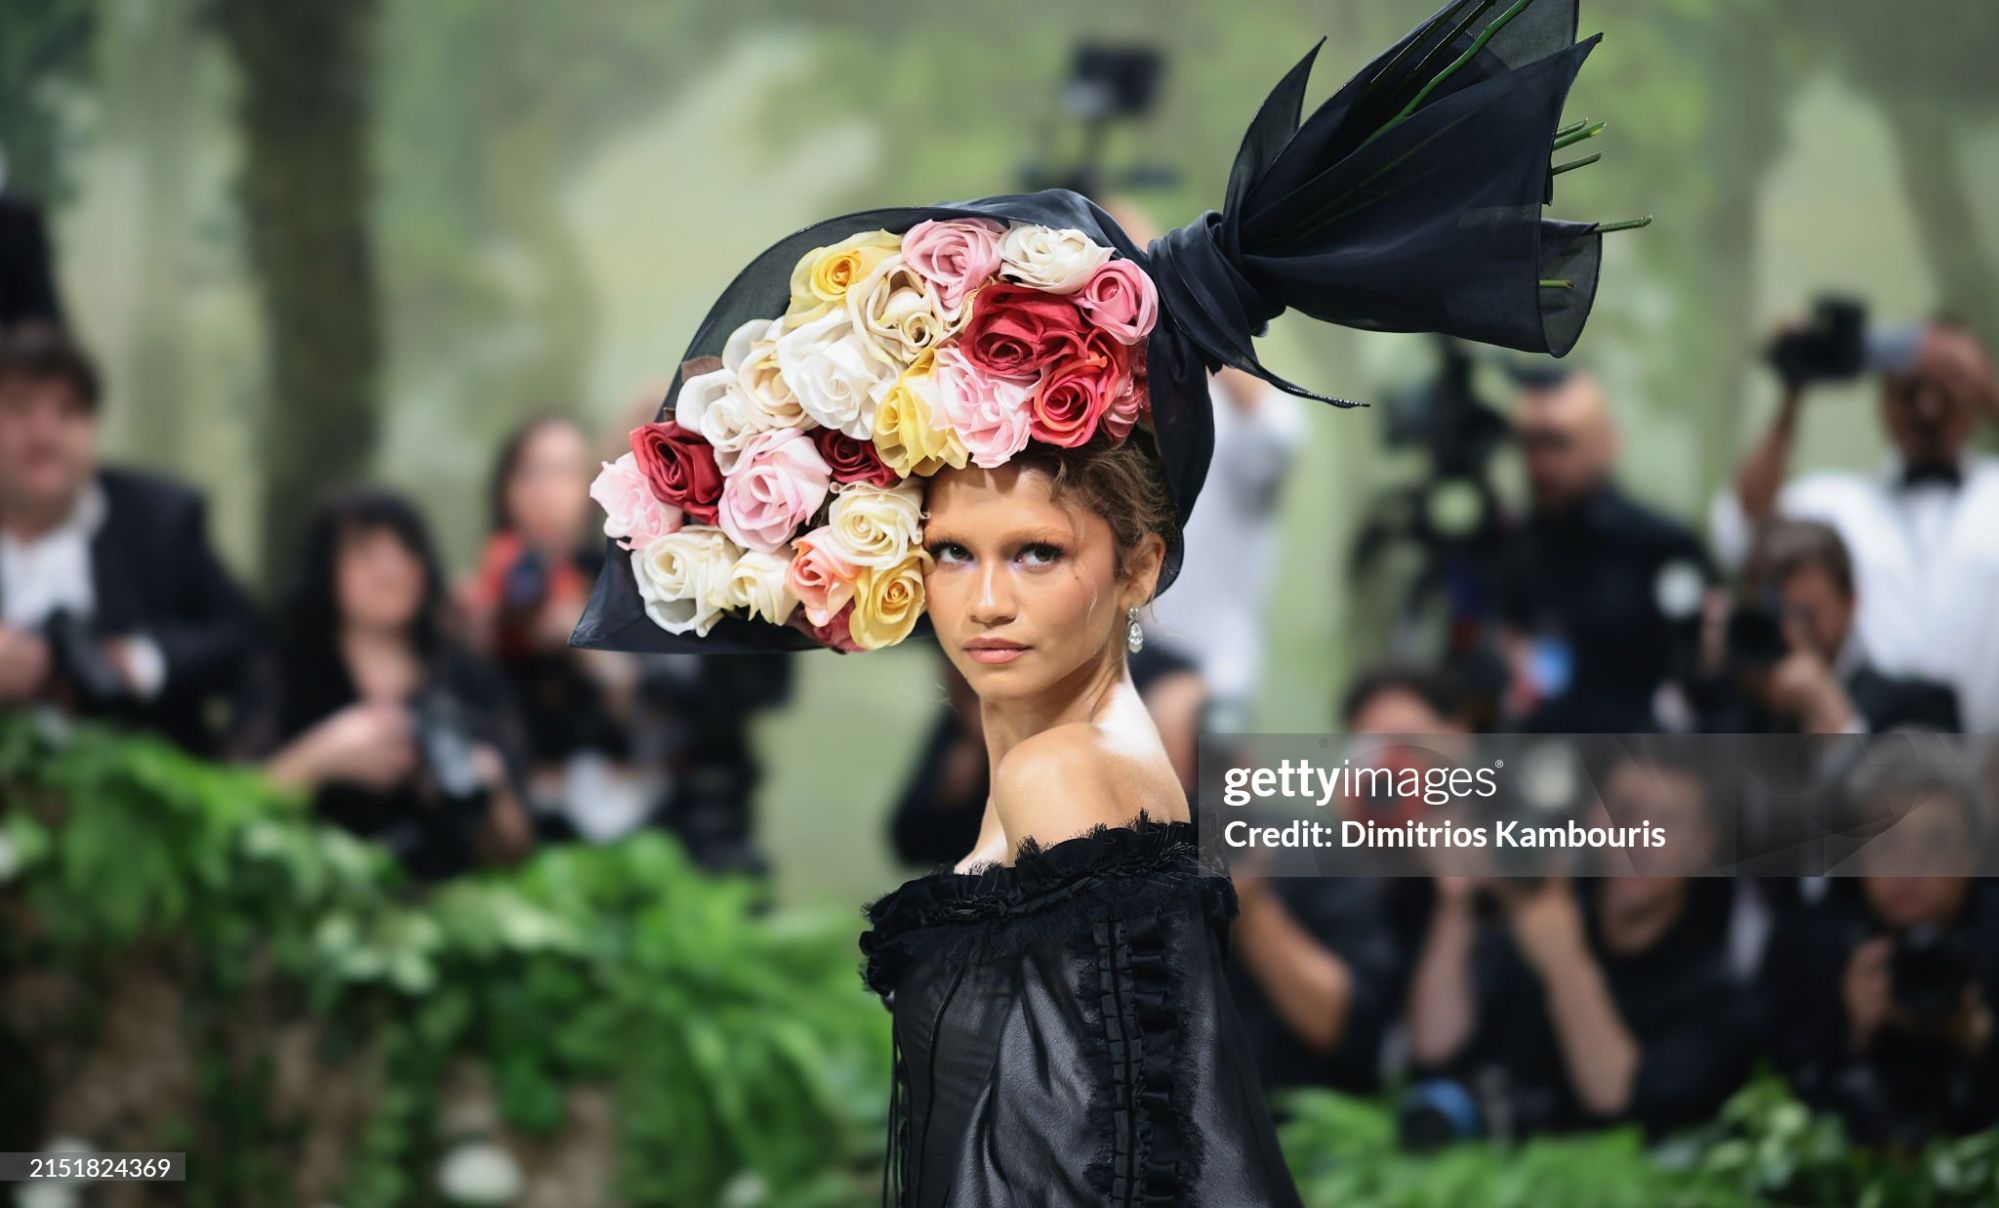 gettyimages-2151824369-2048x2048.jpg